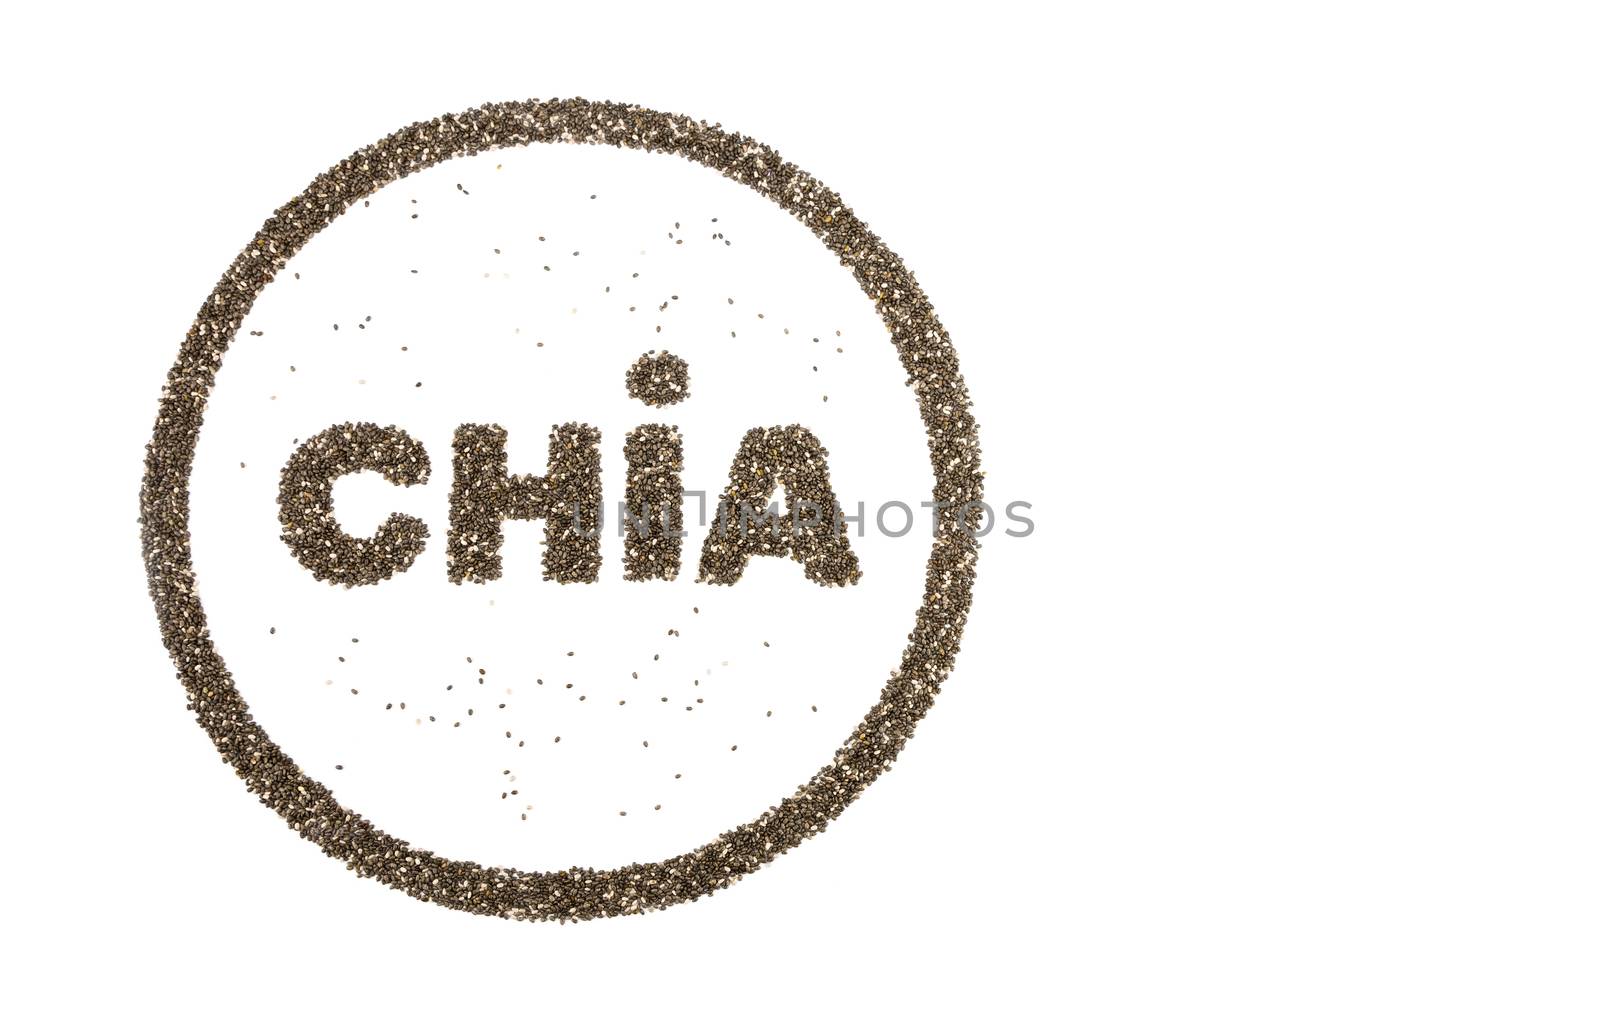 Word CHIA and circle filled with  chia seeds by BenSchonewille